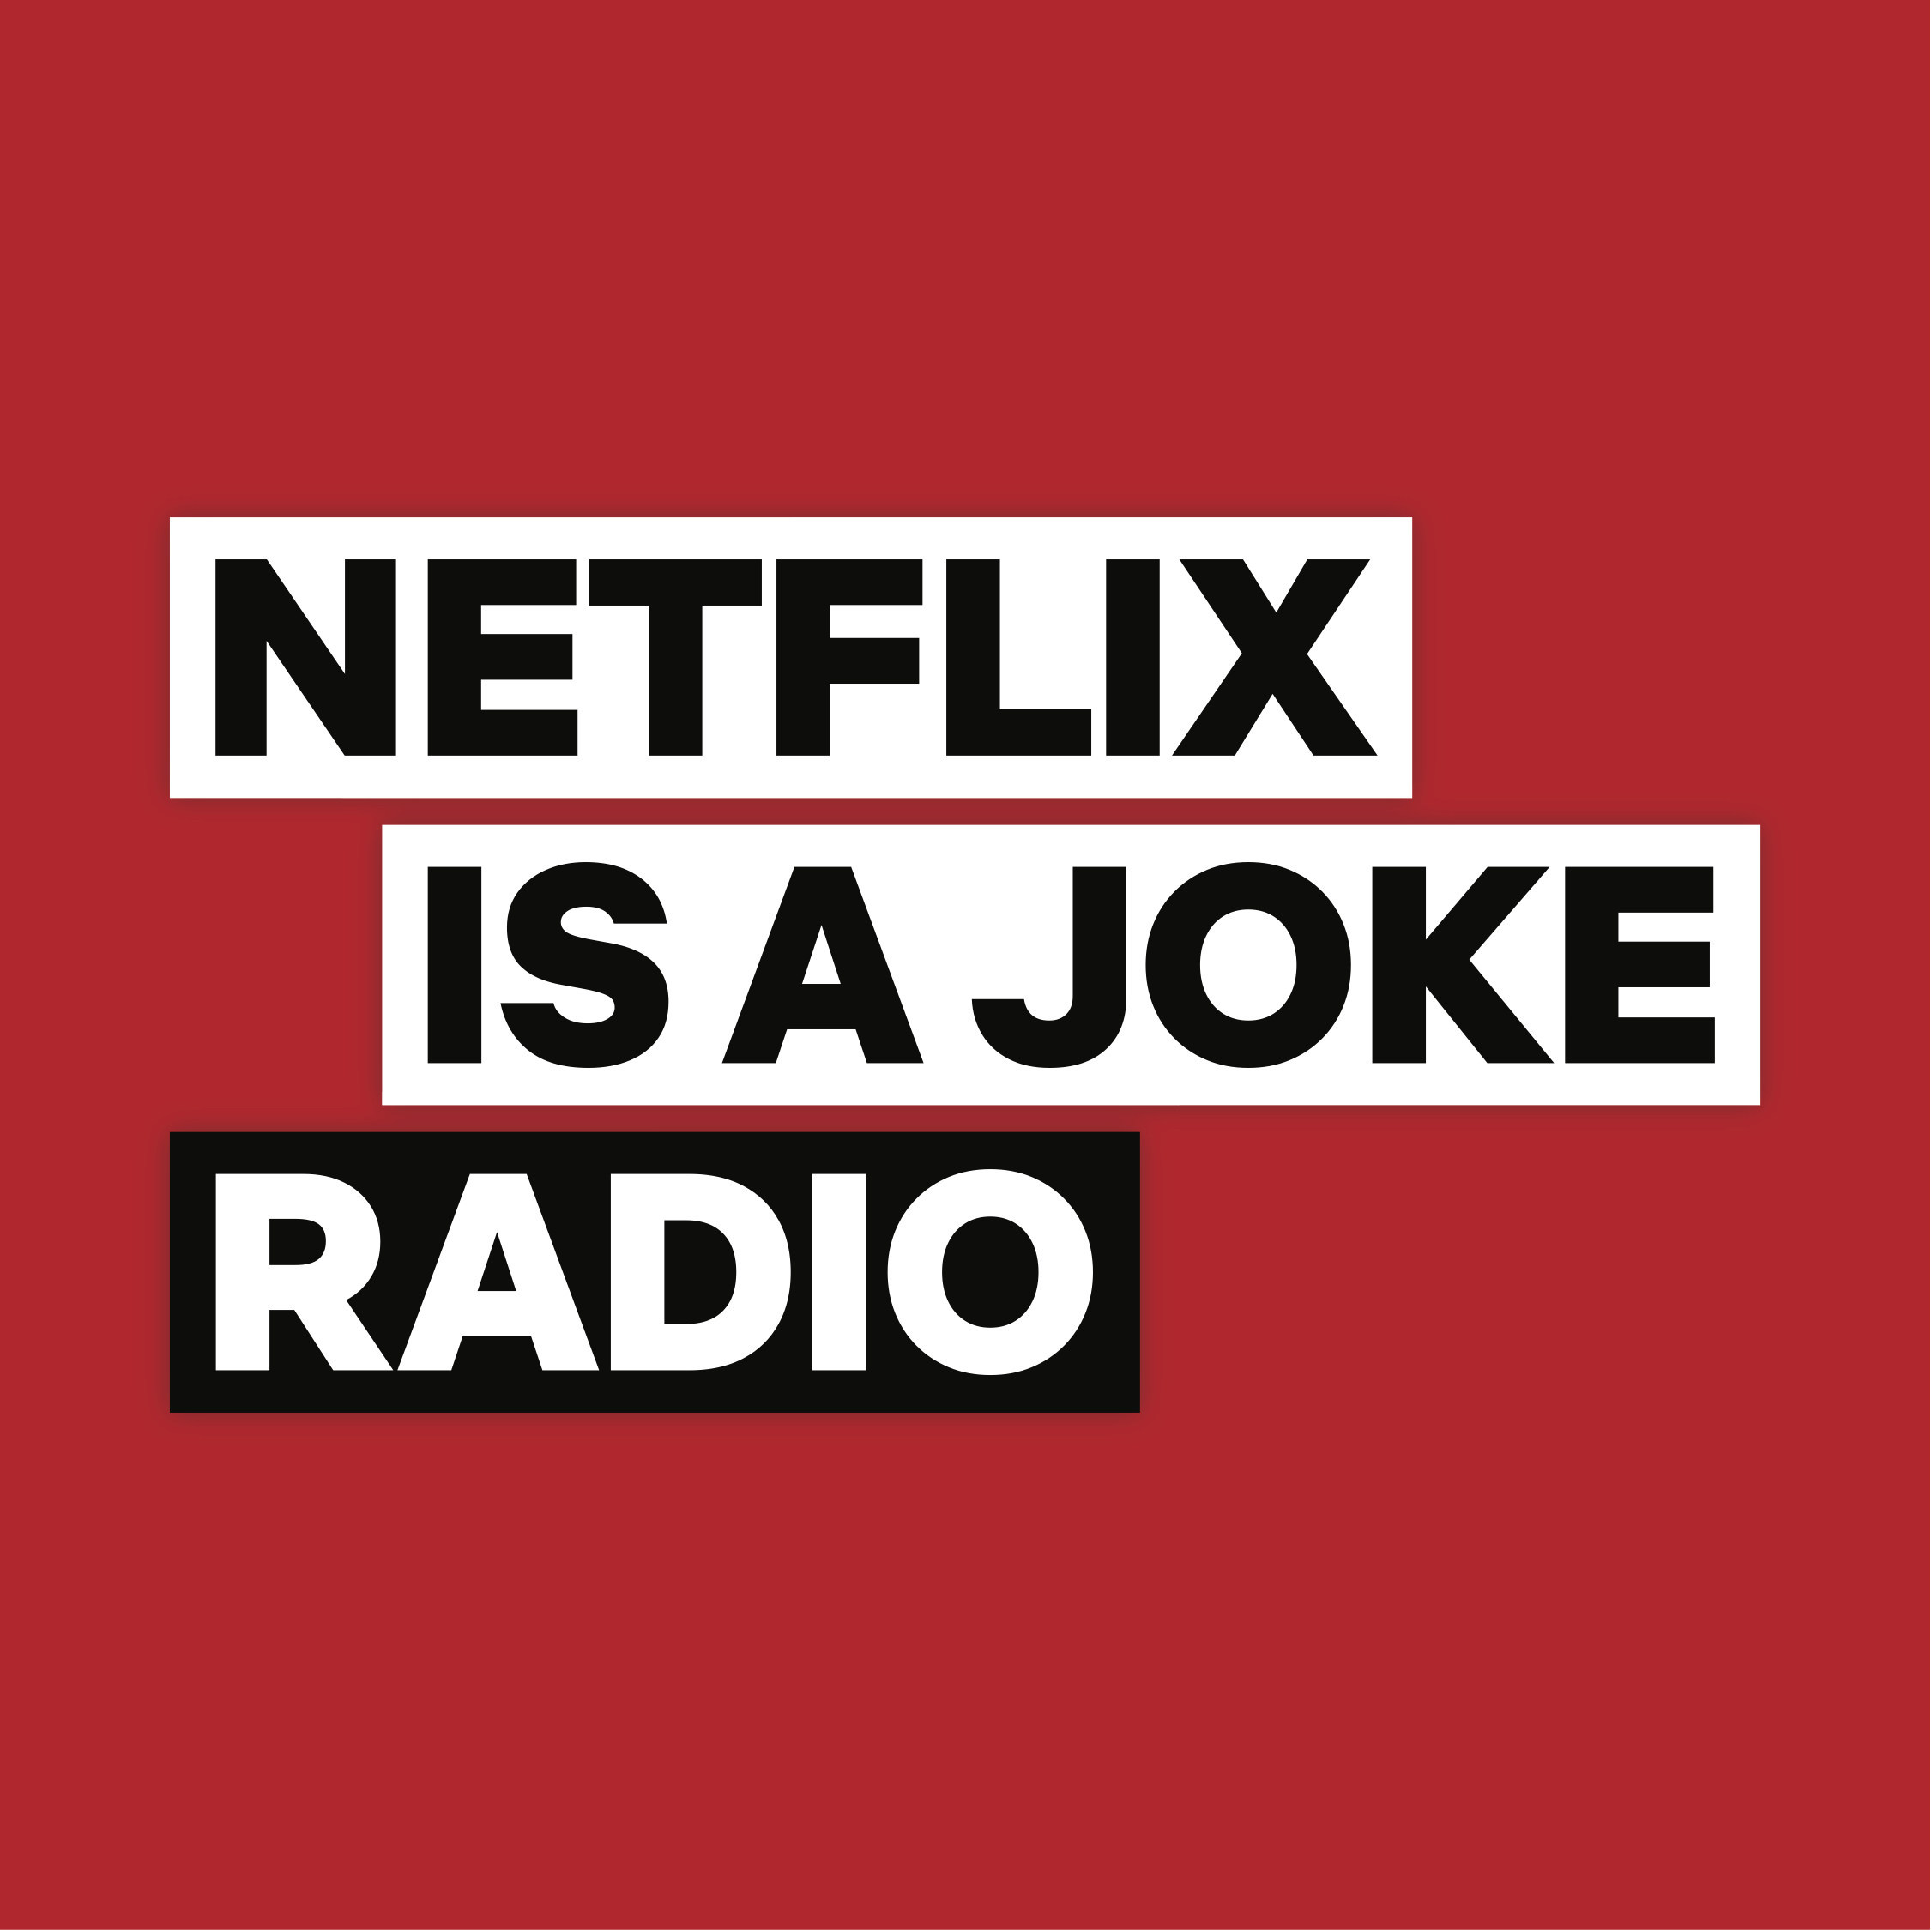 "Netflix Is A Joke Radio" Channel to Broadcast Exclusively on SiriusXM Starting April 15